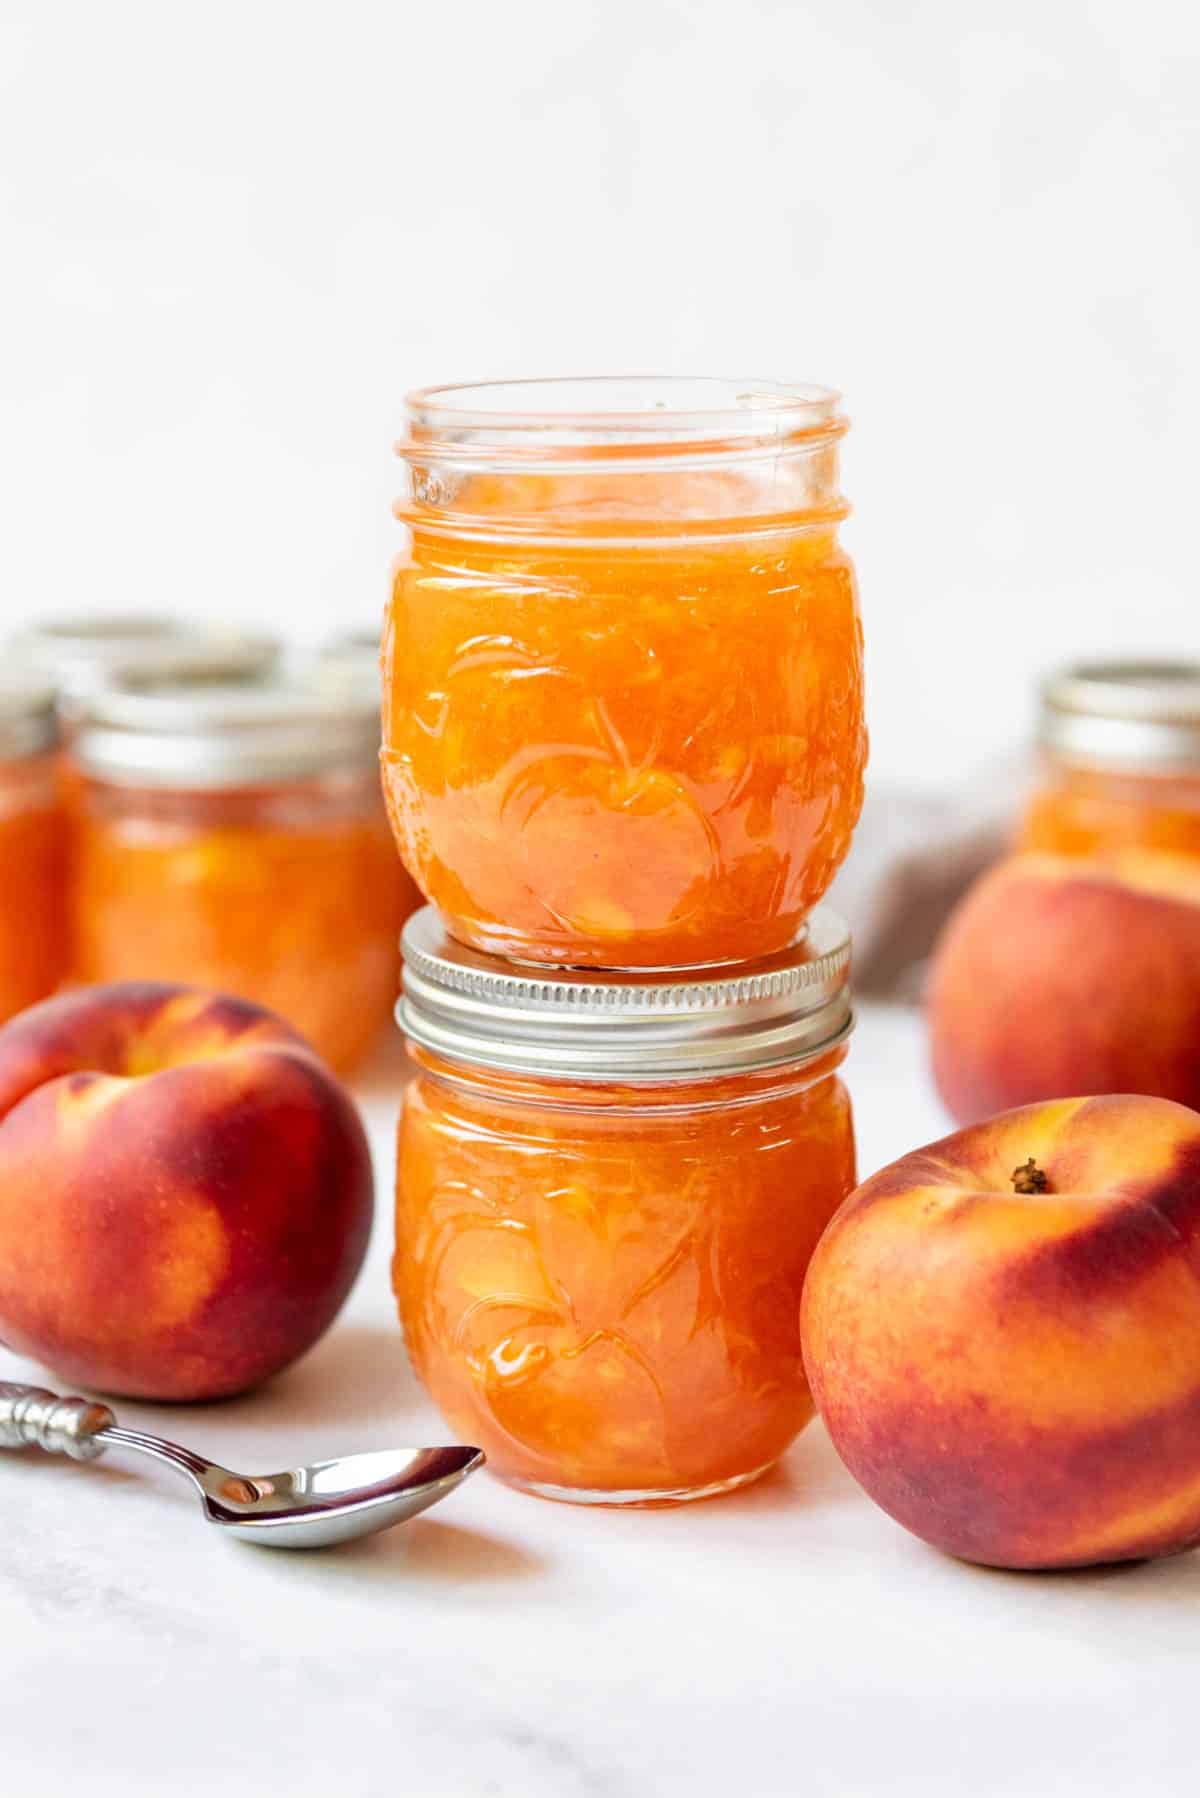 An image of two jars of peach jam stacked on top of each other.